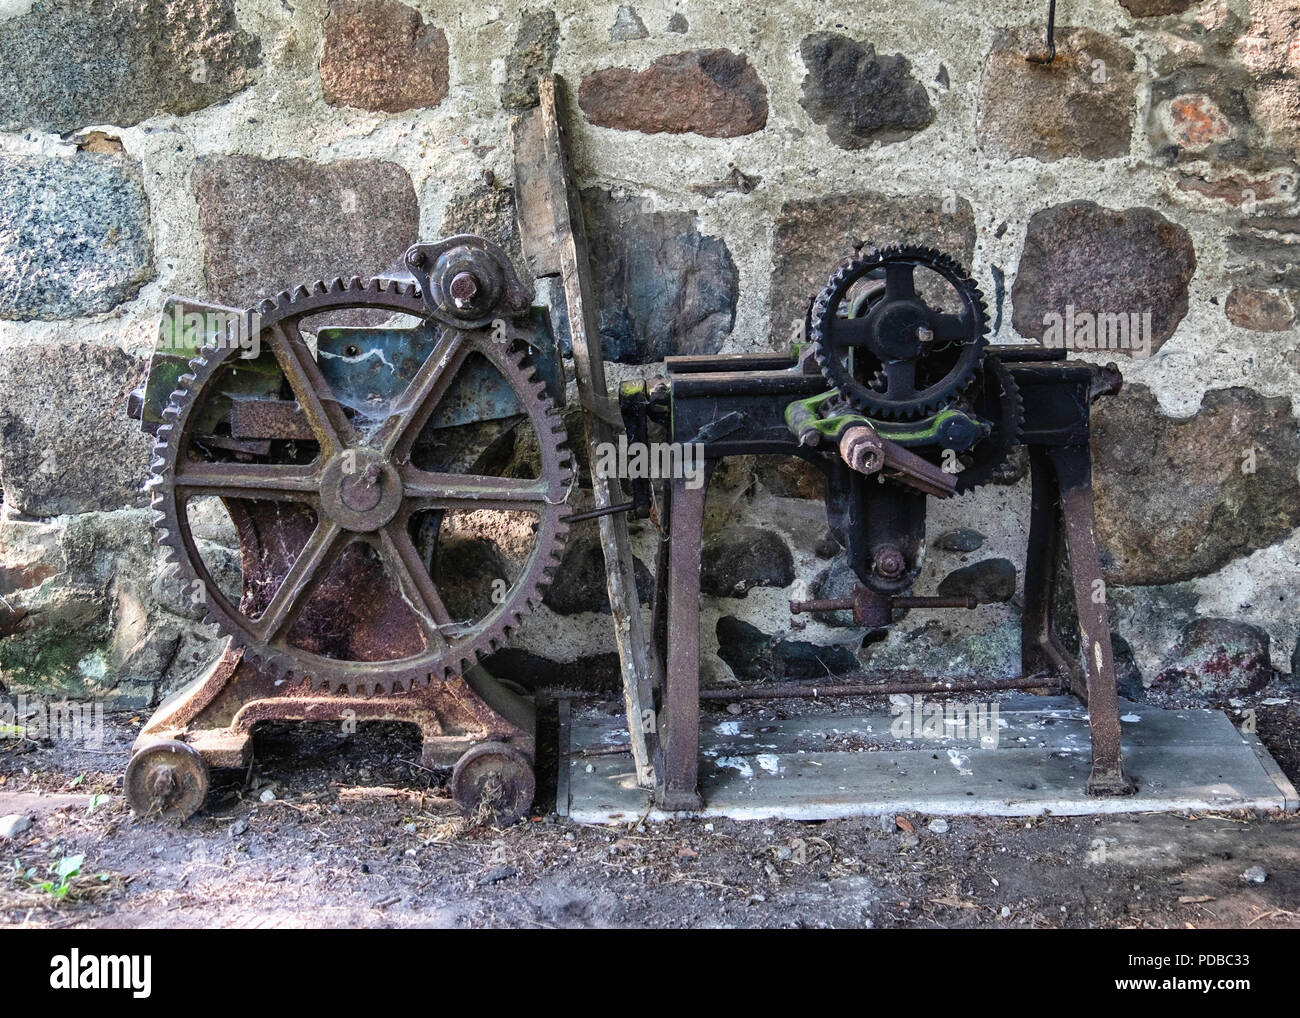 Germany,Stolpe an der Peene, Historic old blacksmith on Gutshaus Stolpe Estate grounds. Rusty machinery & stone wall                                   Stock Photo